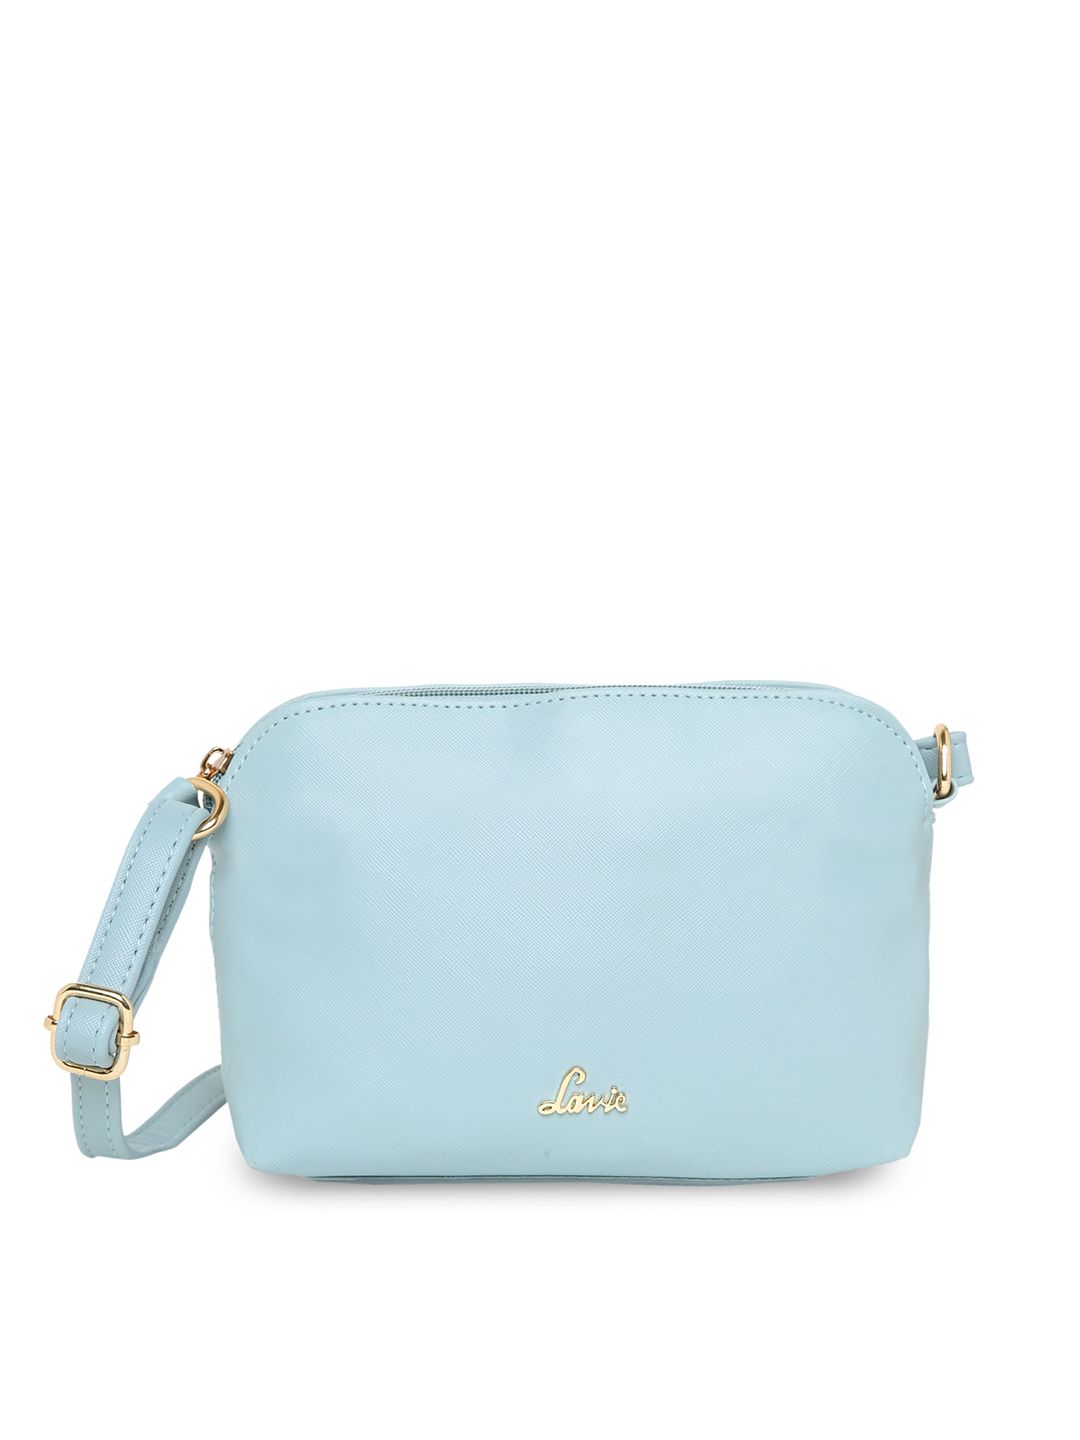 Lavie Blue Textured Sling Bag Price in India